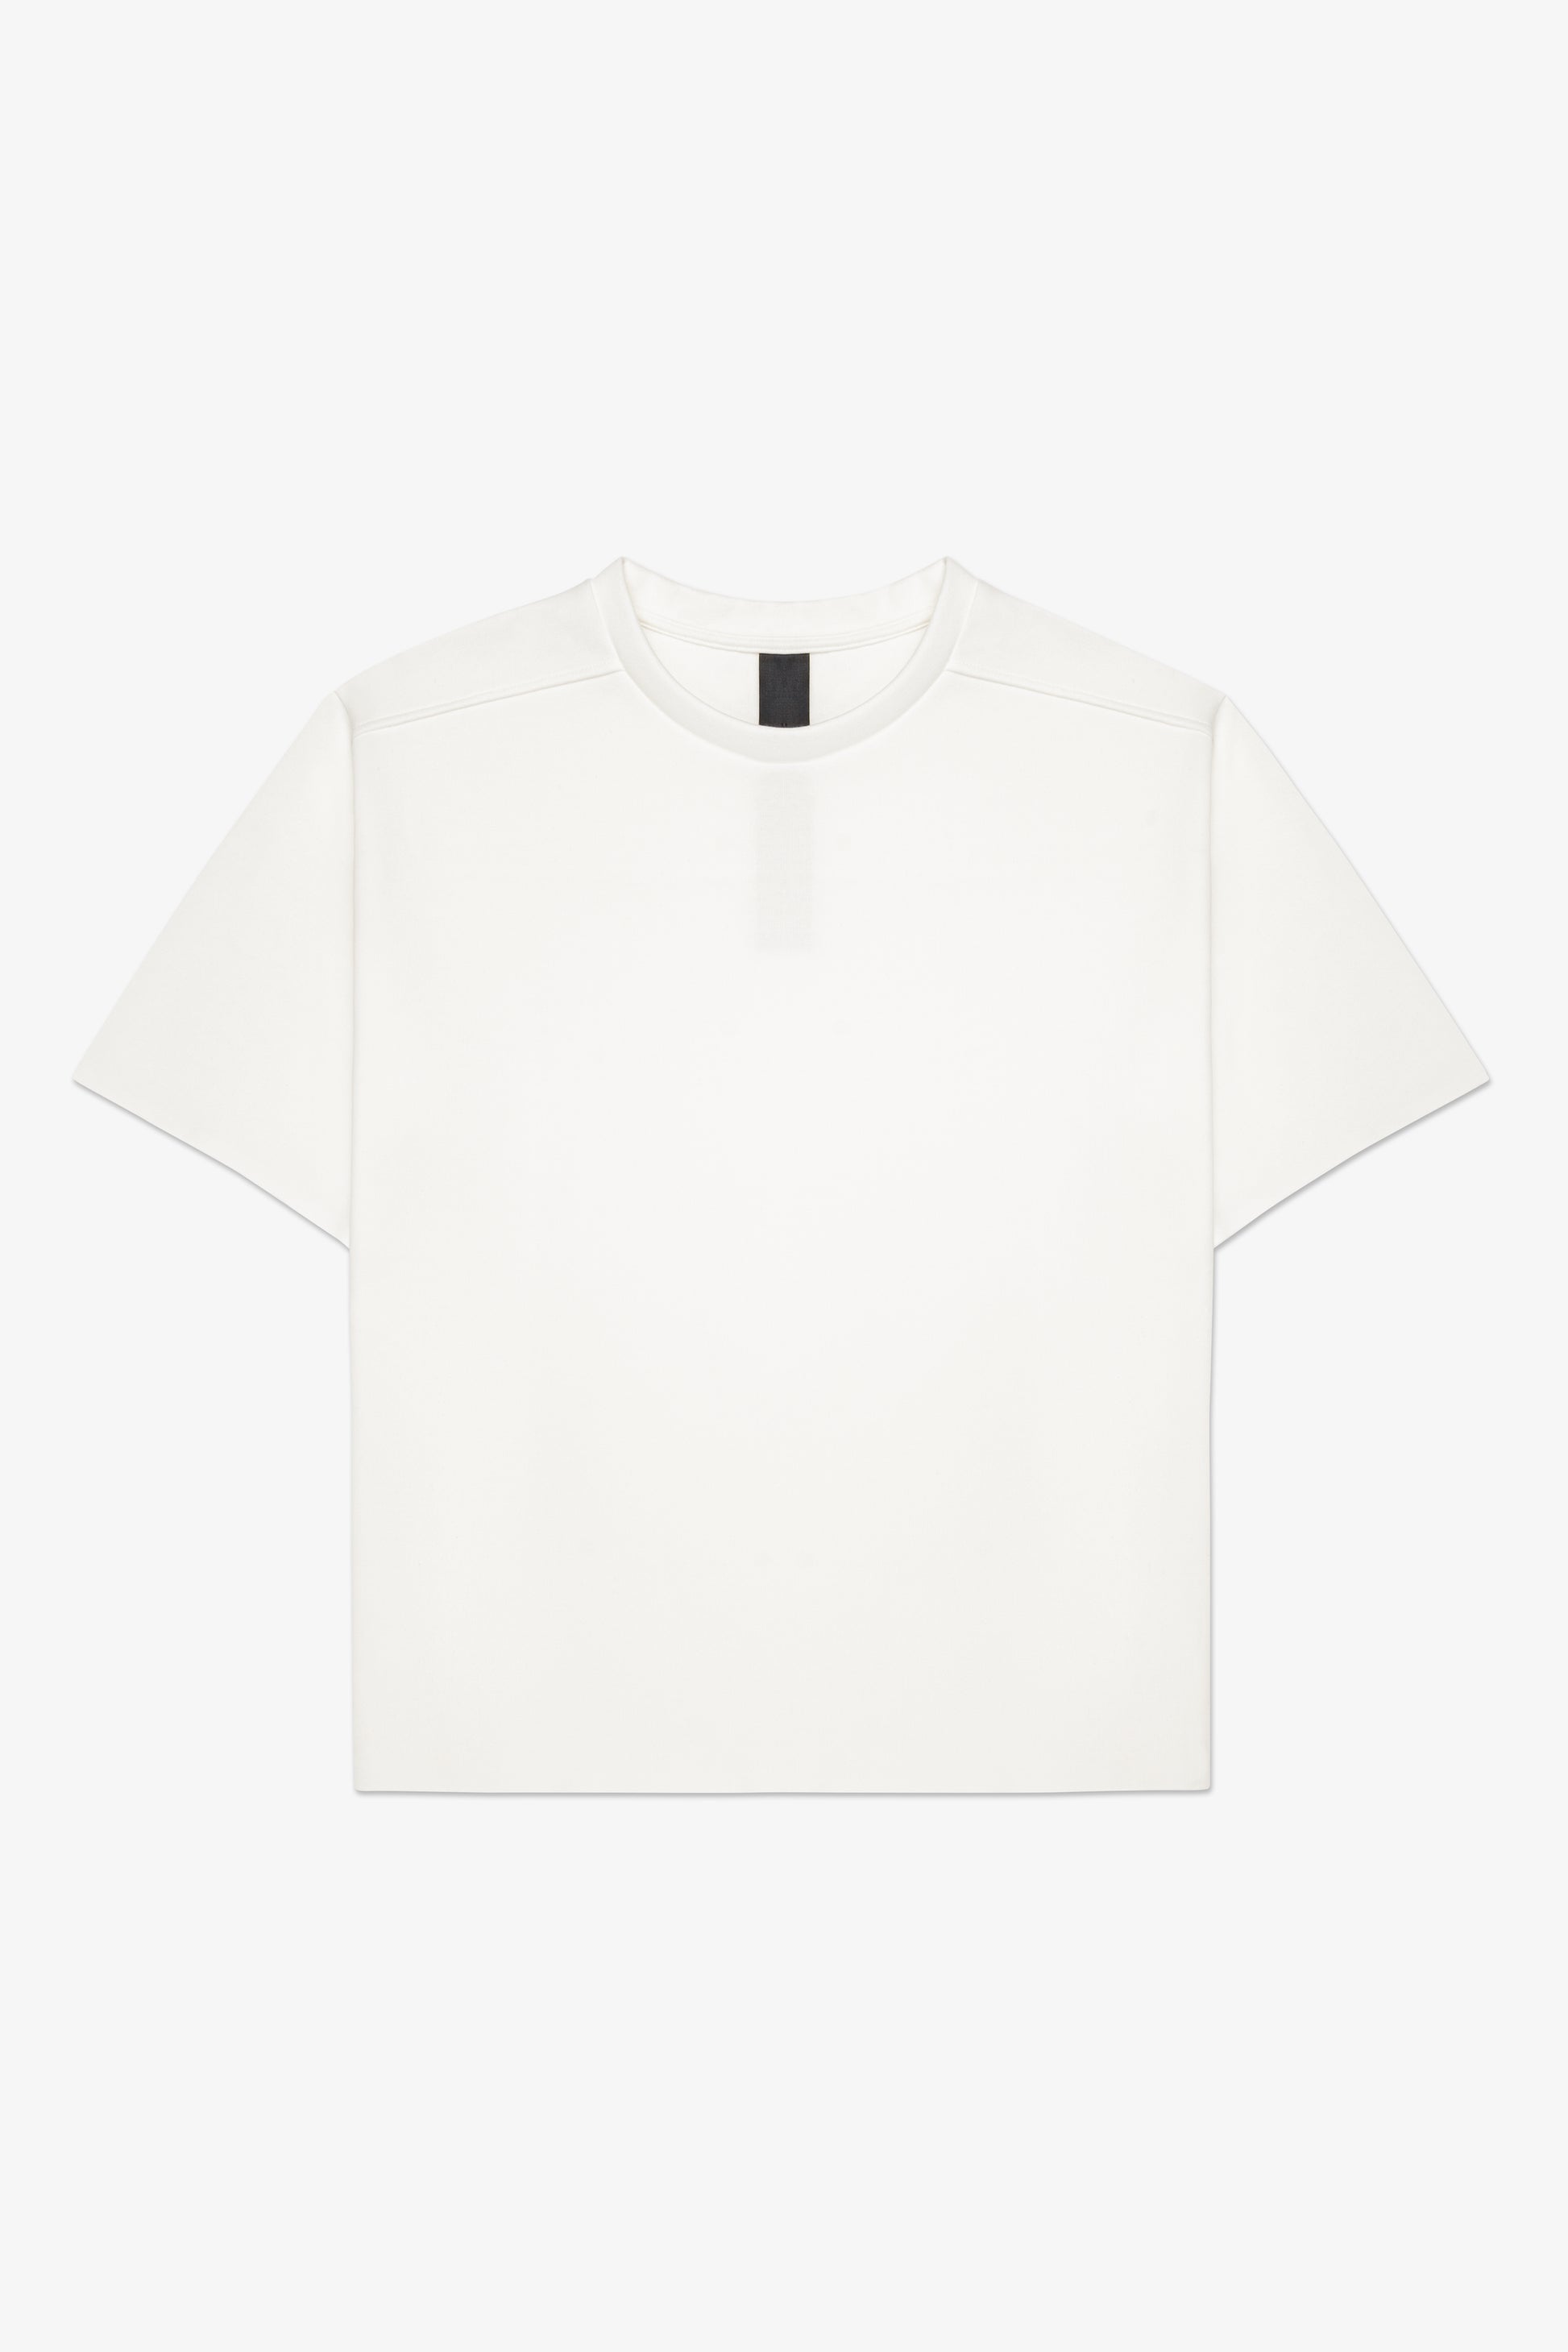 Front of white boxy t-shirt